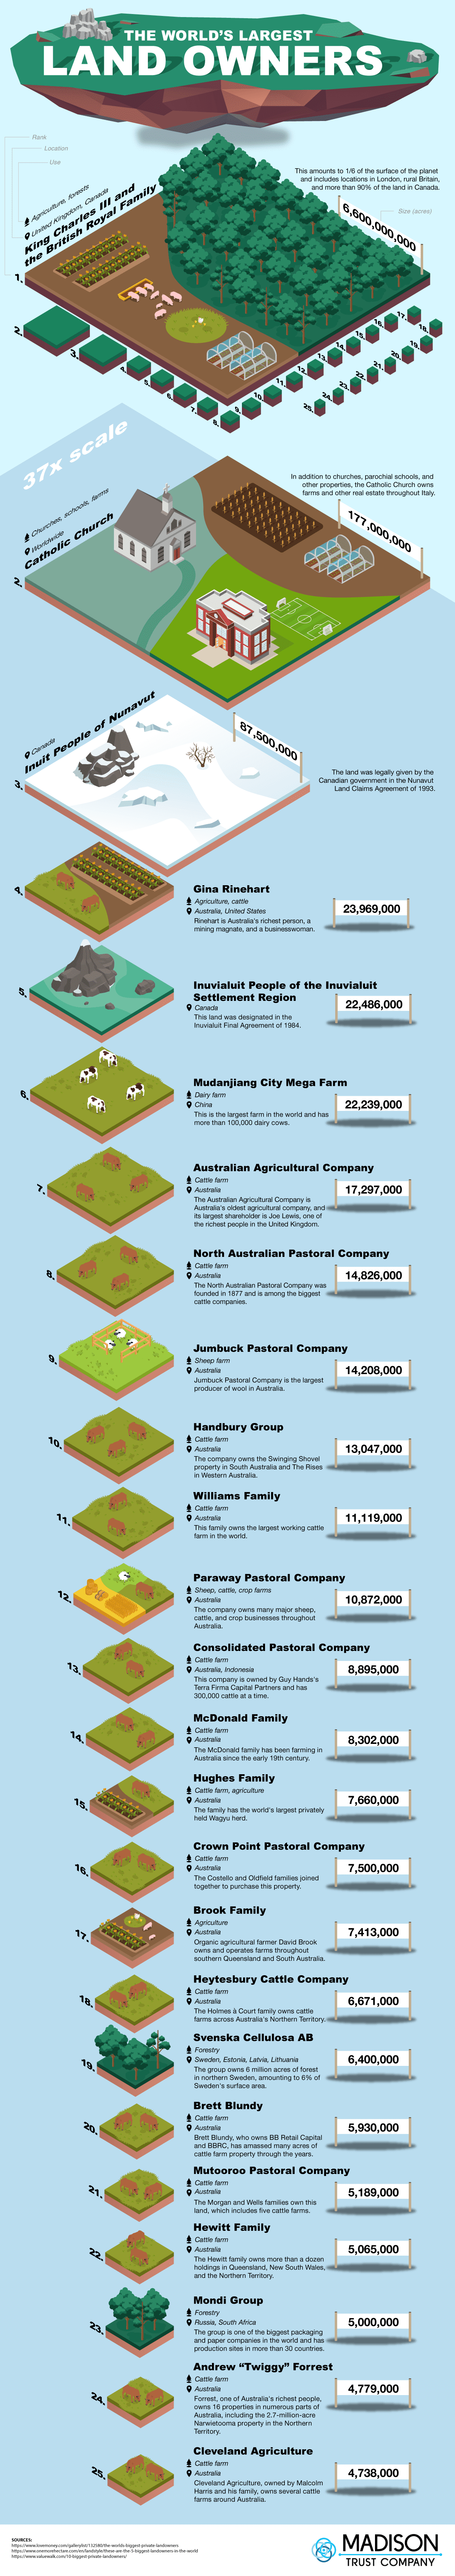 The World's Largest Land Owners